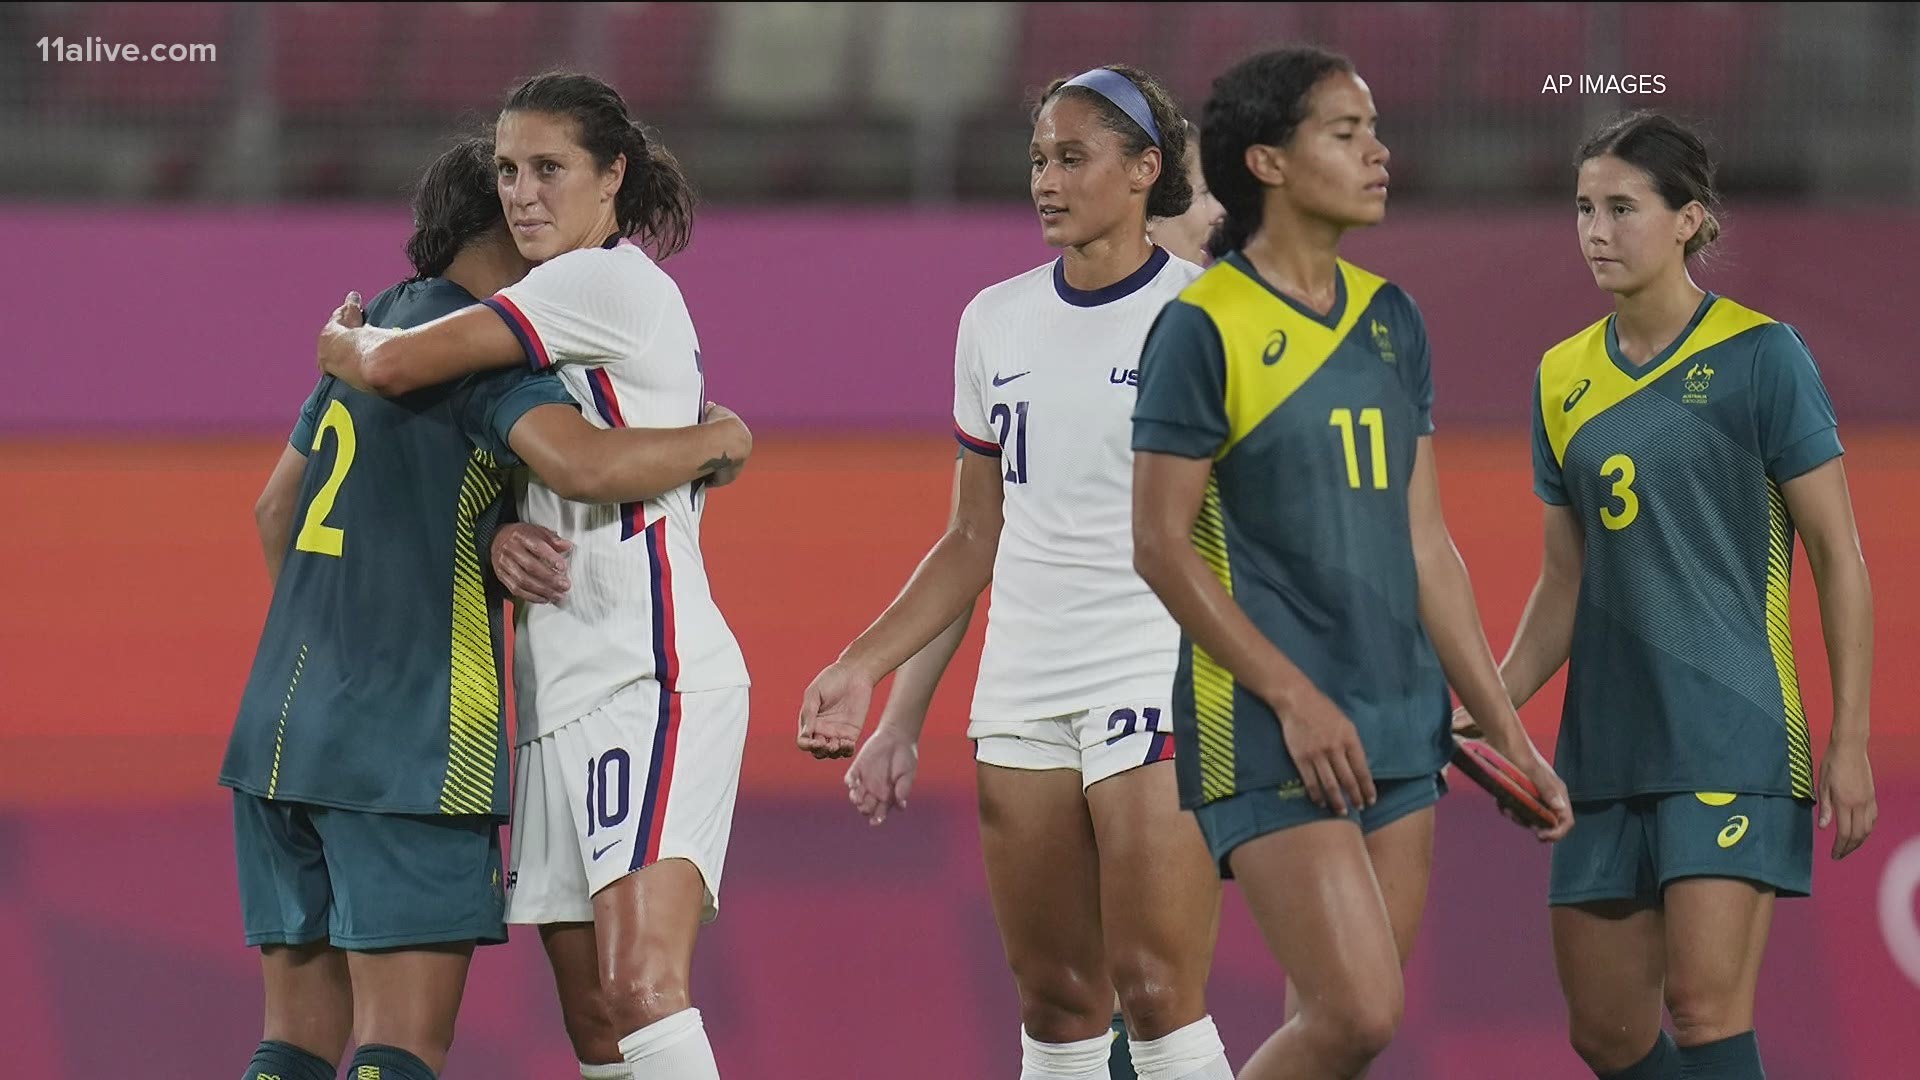 They played a scoreless draw with Australia on Tuesday and finished in the top two of their group. The team will play the Netherlands on Friday